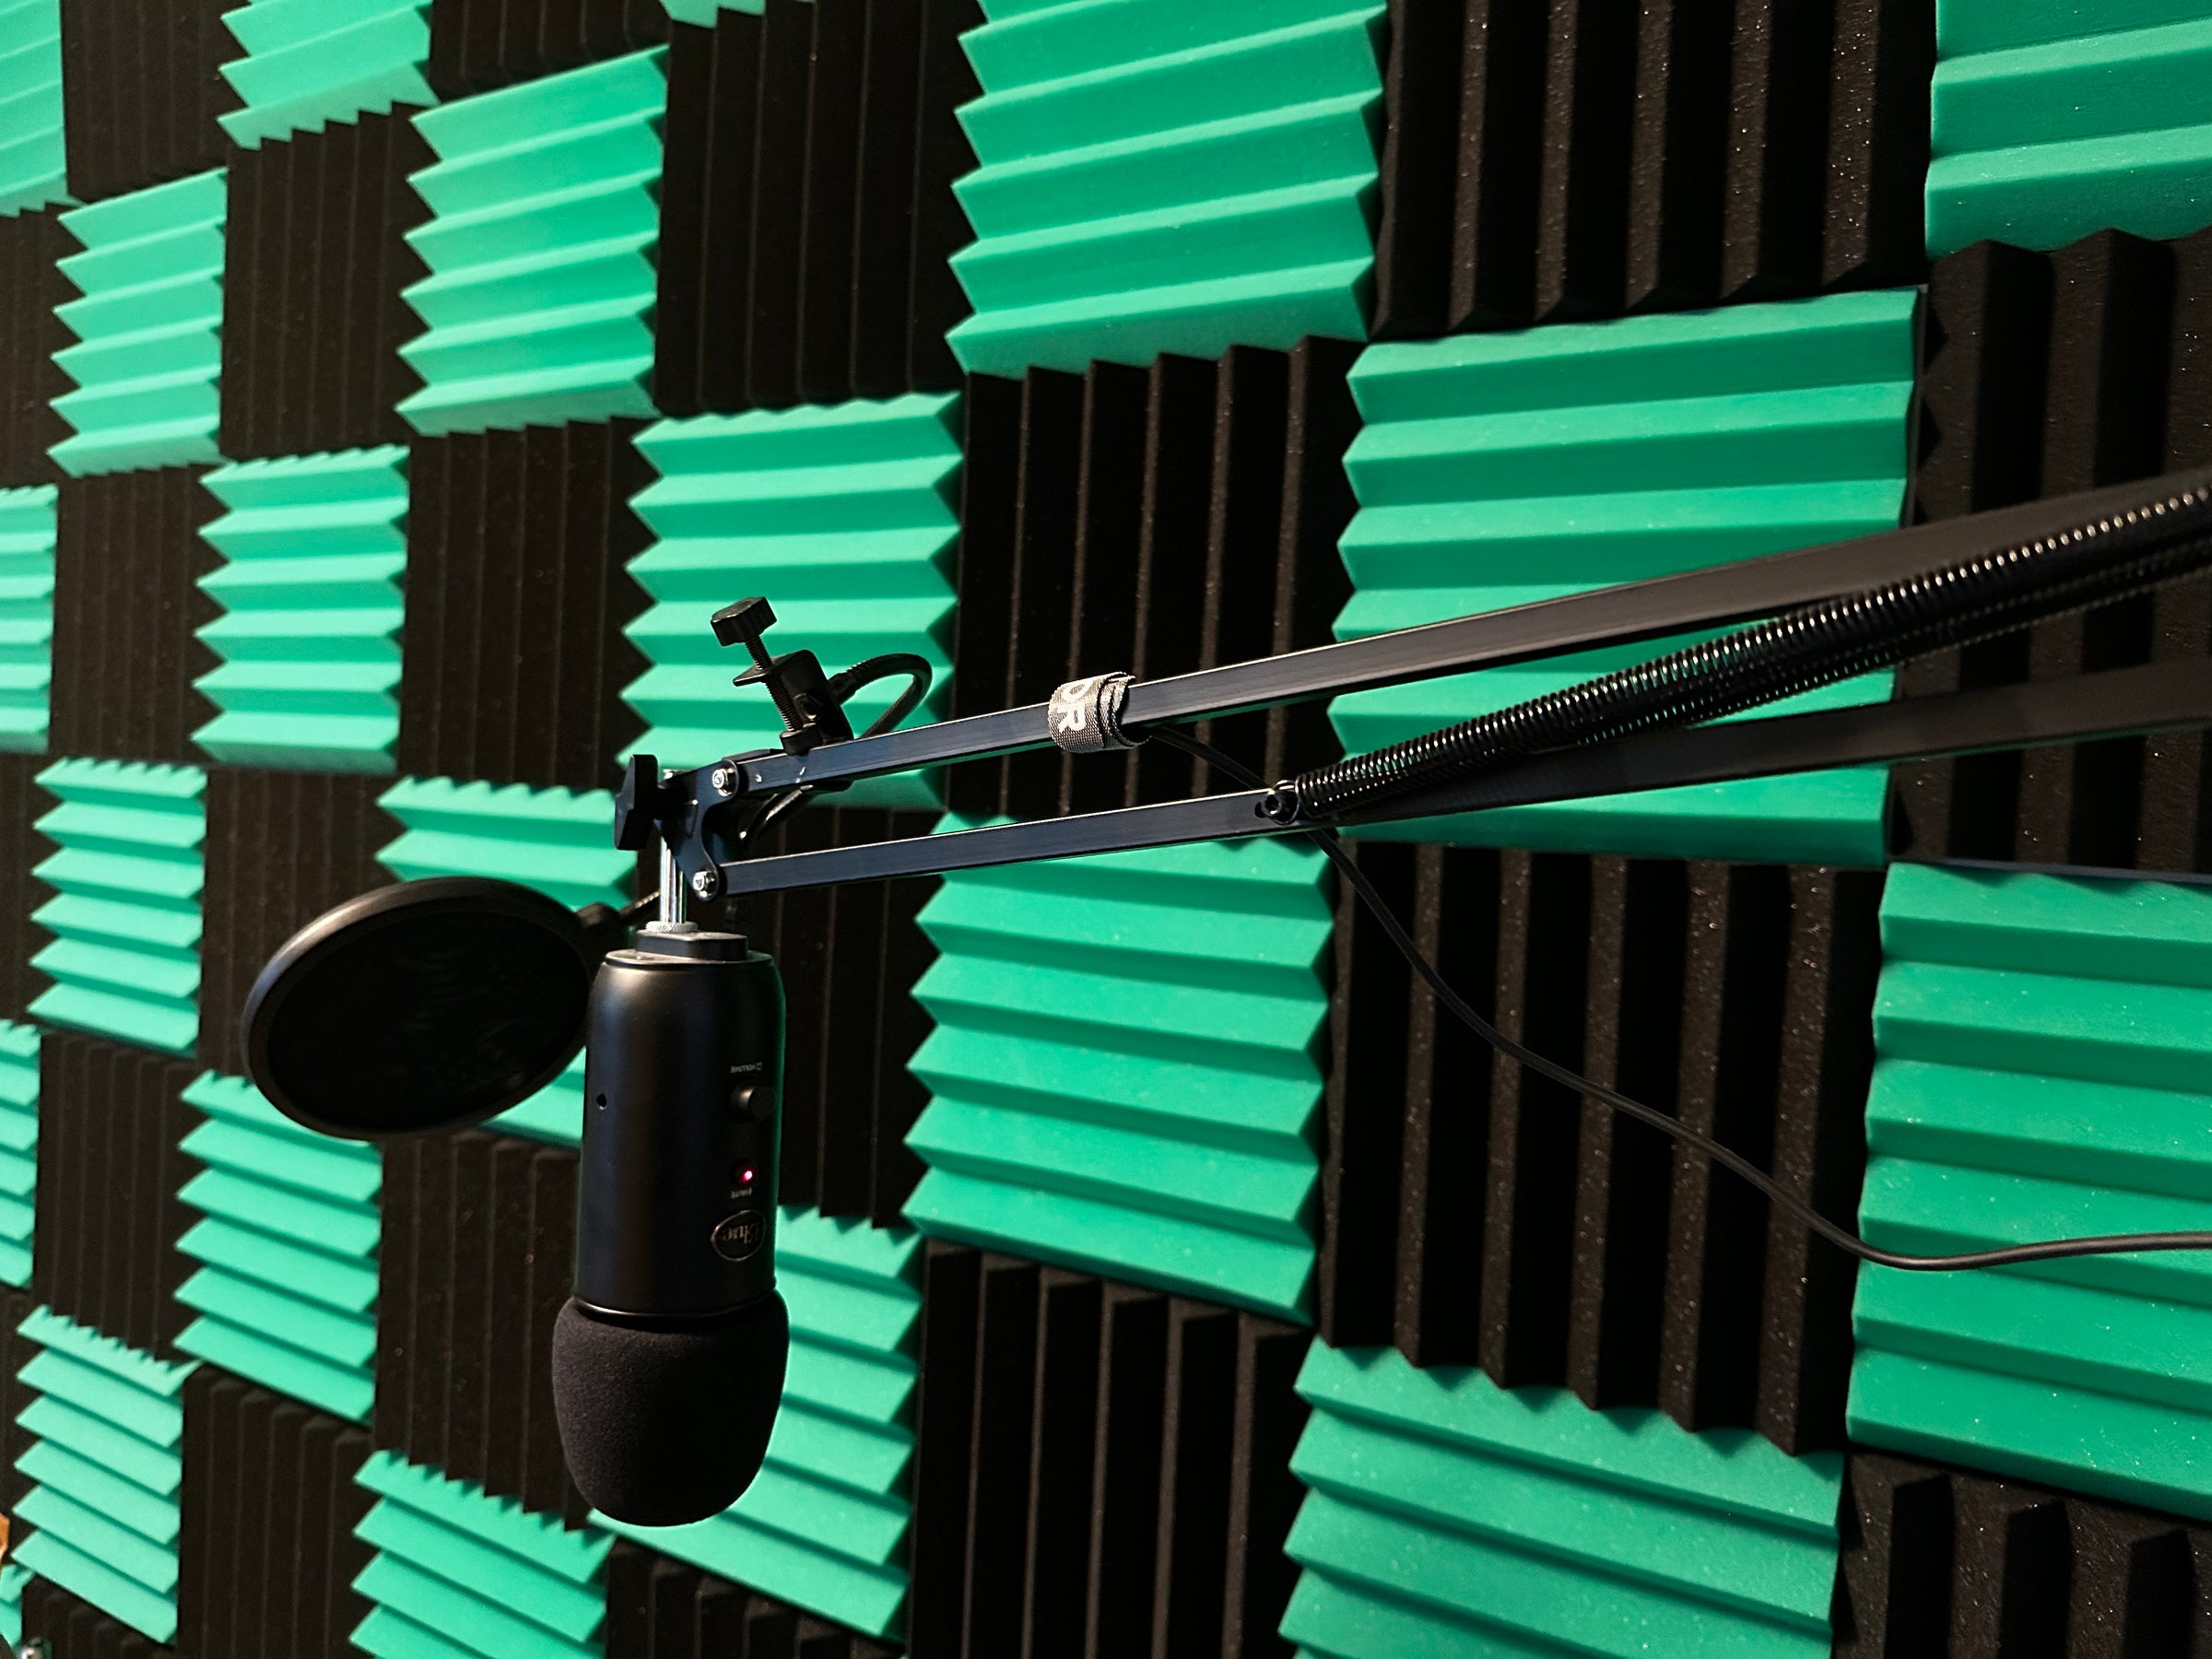 Checkerboard grid of sound insulation foam tiles on a wall with a professional arm-mounted microphone in front 